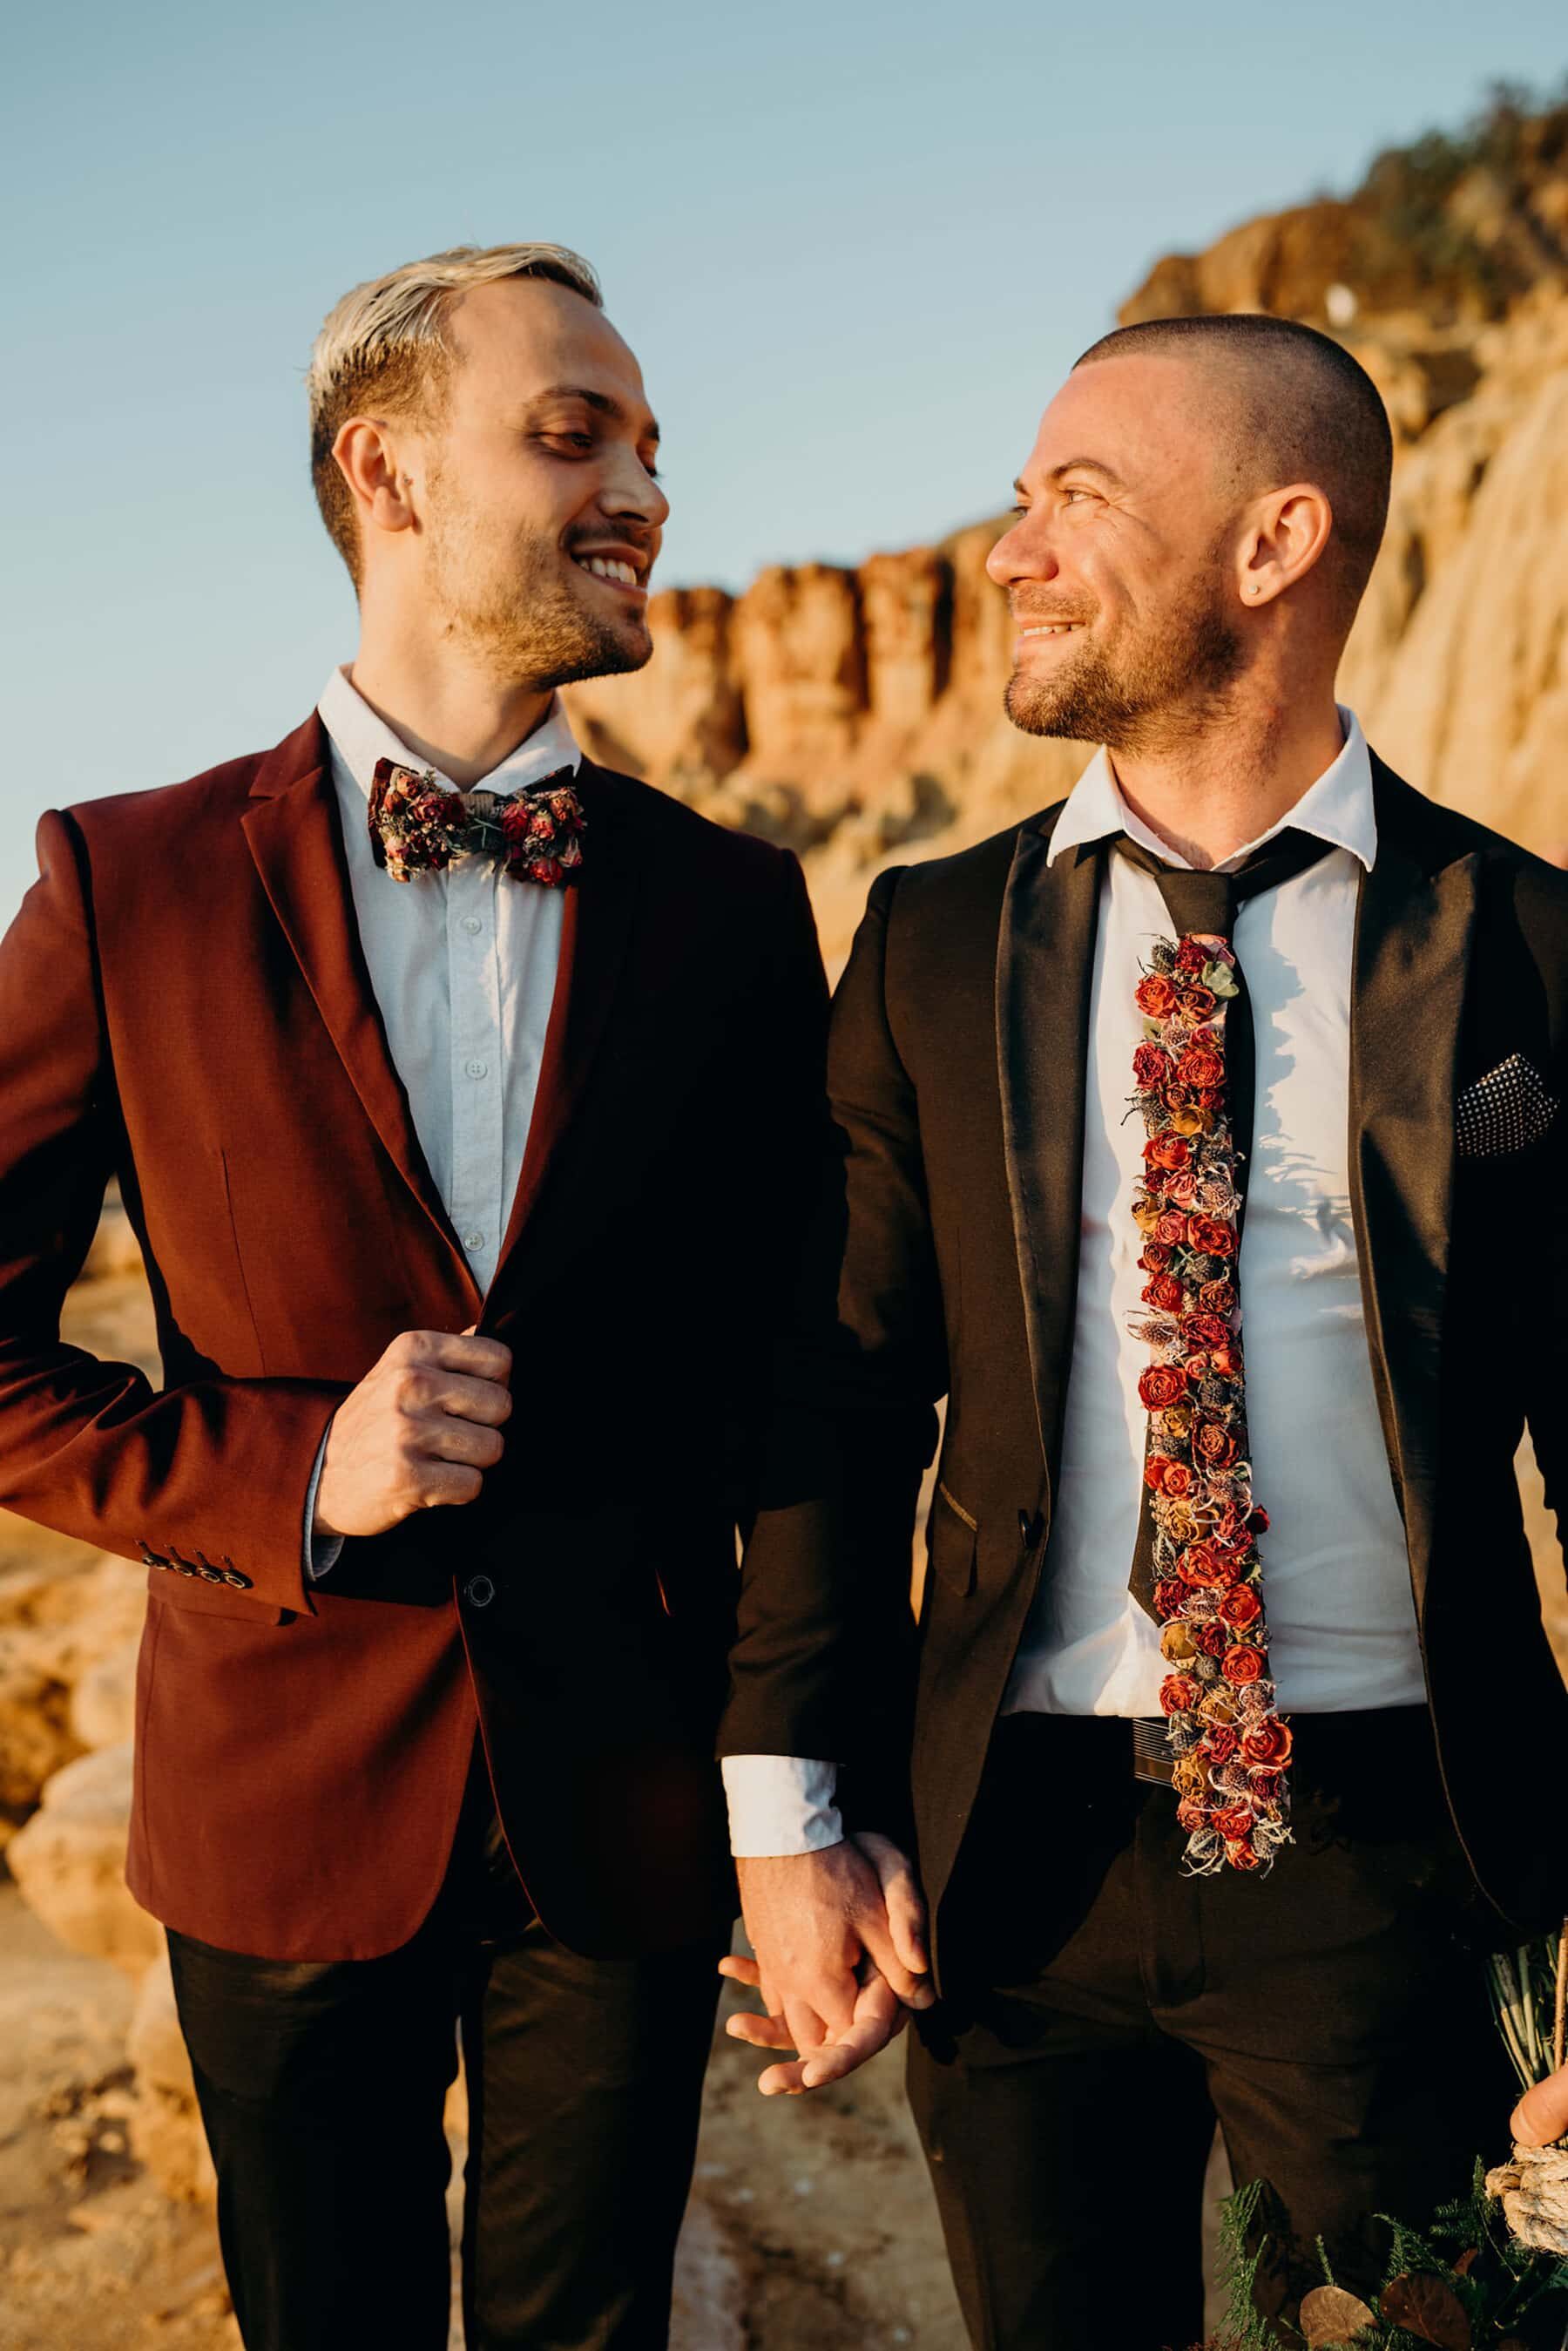 tie and bow tie made from dried flowers